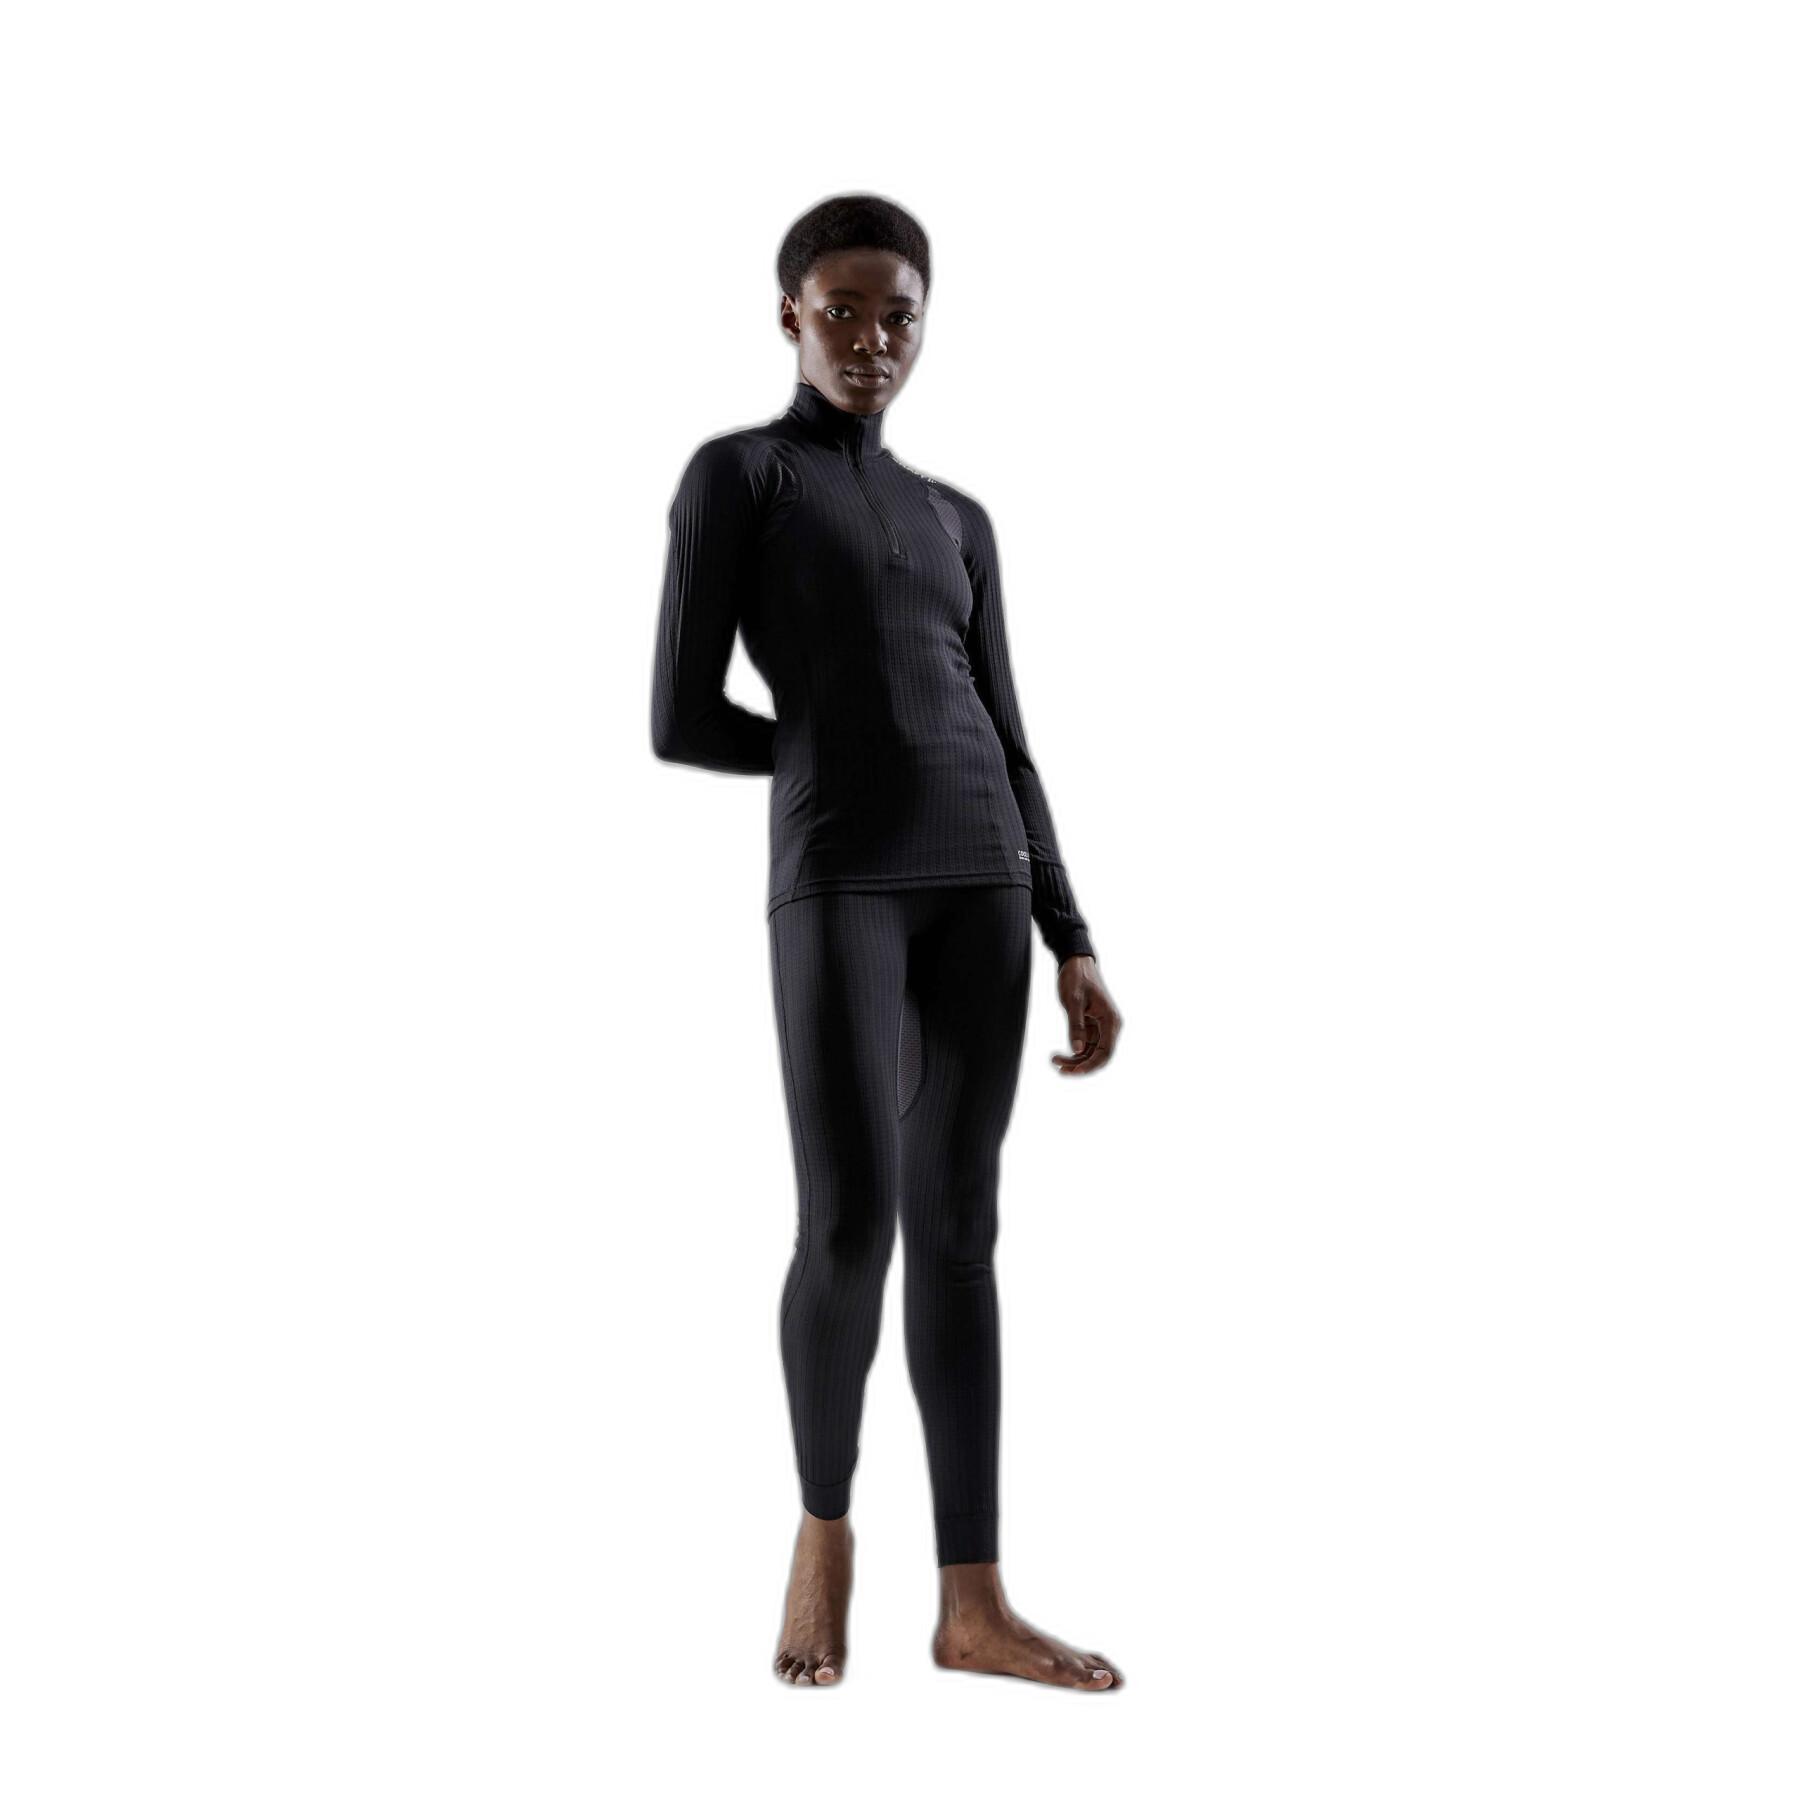 Women's zipped compression jersey Craft Active Extreme